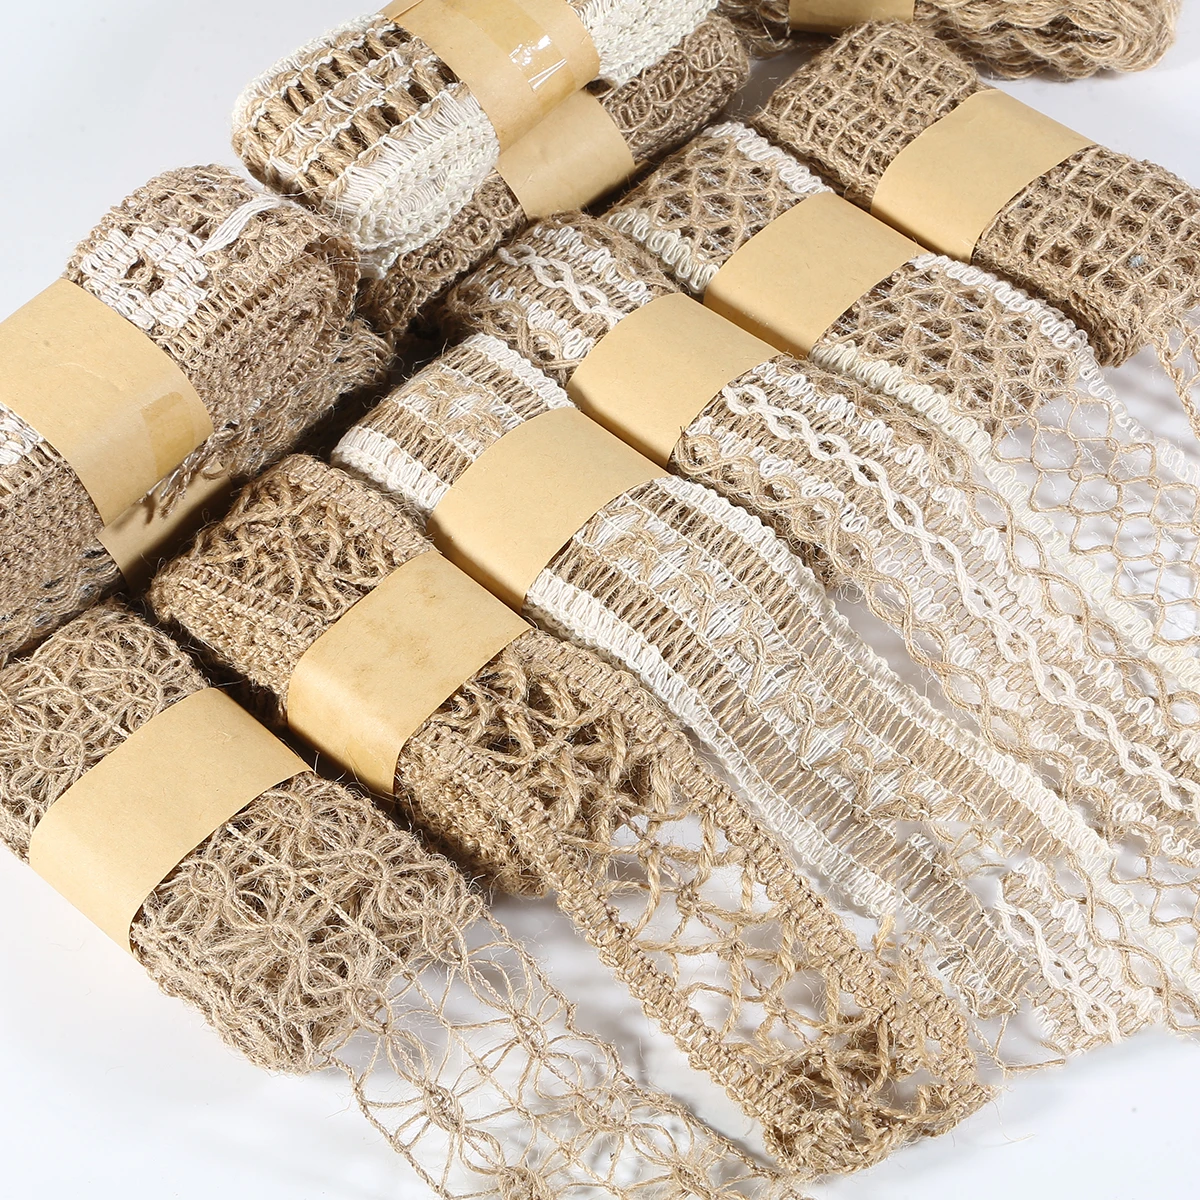 Burlap Flat Cords Hessian Vintage Rustic Hemp Jute Rope Christmas Wedding Party Centerpieces Decoration Gift Wrapping Ribbons